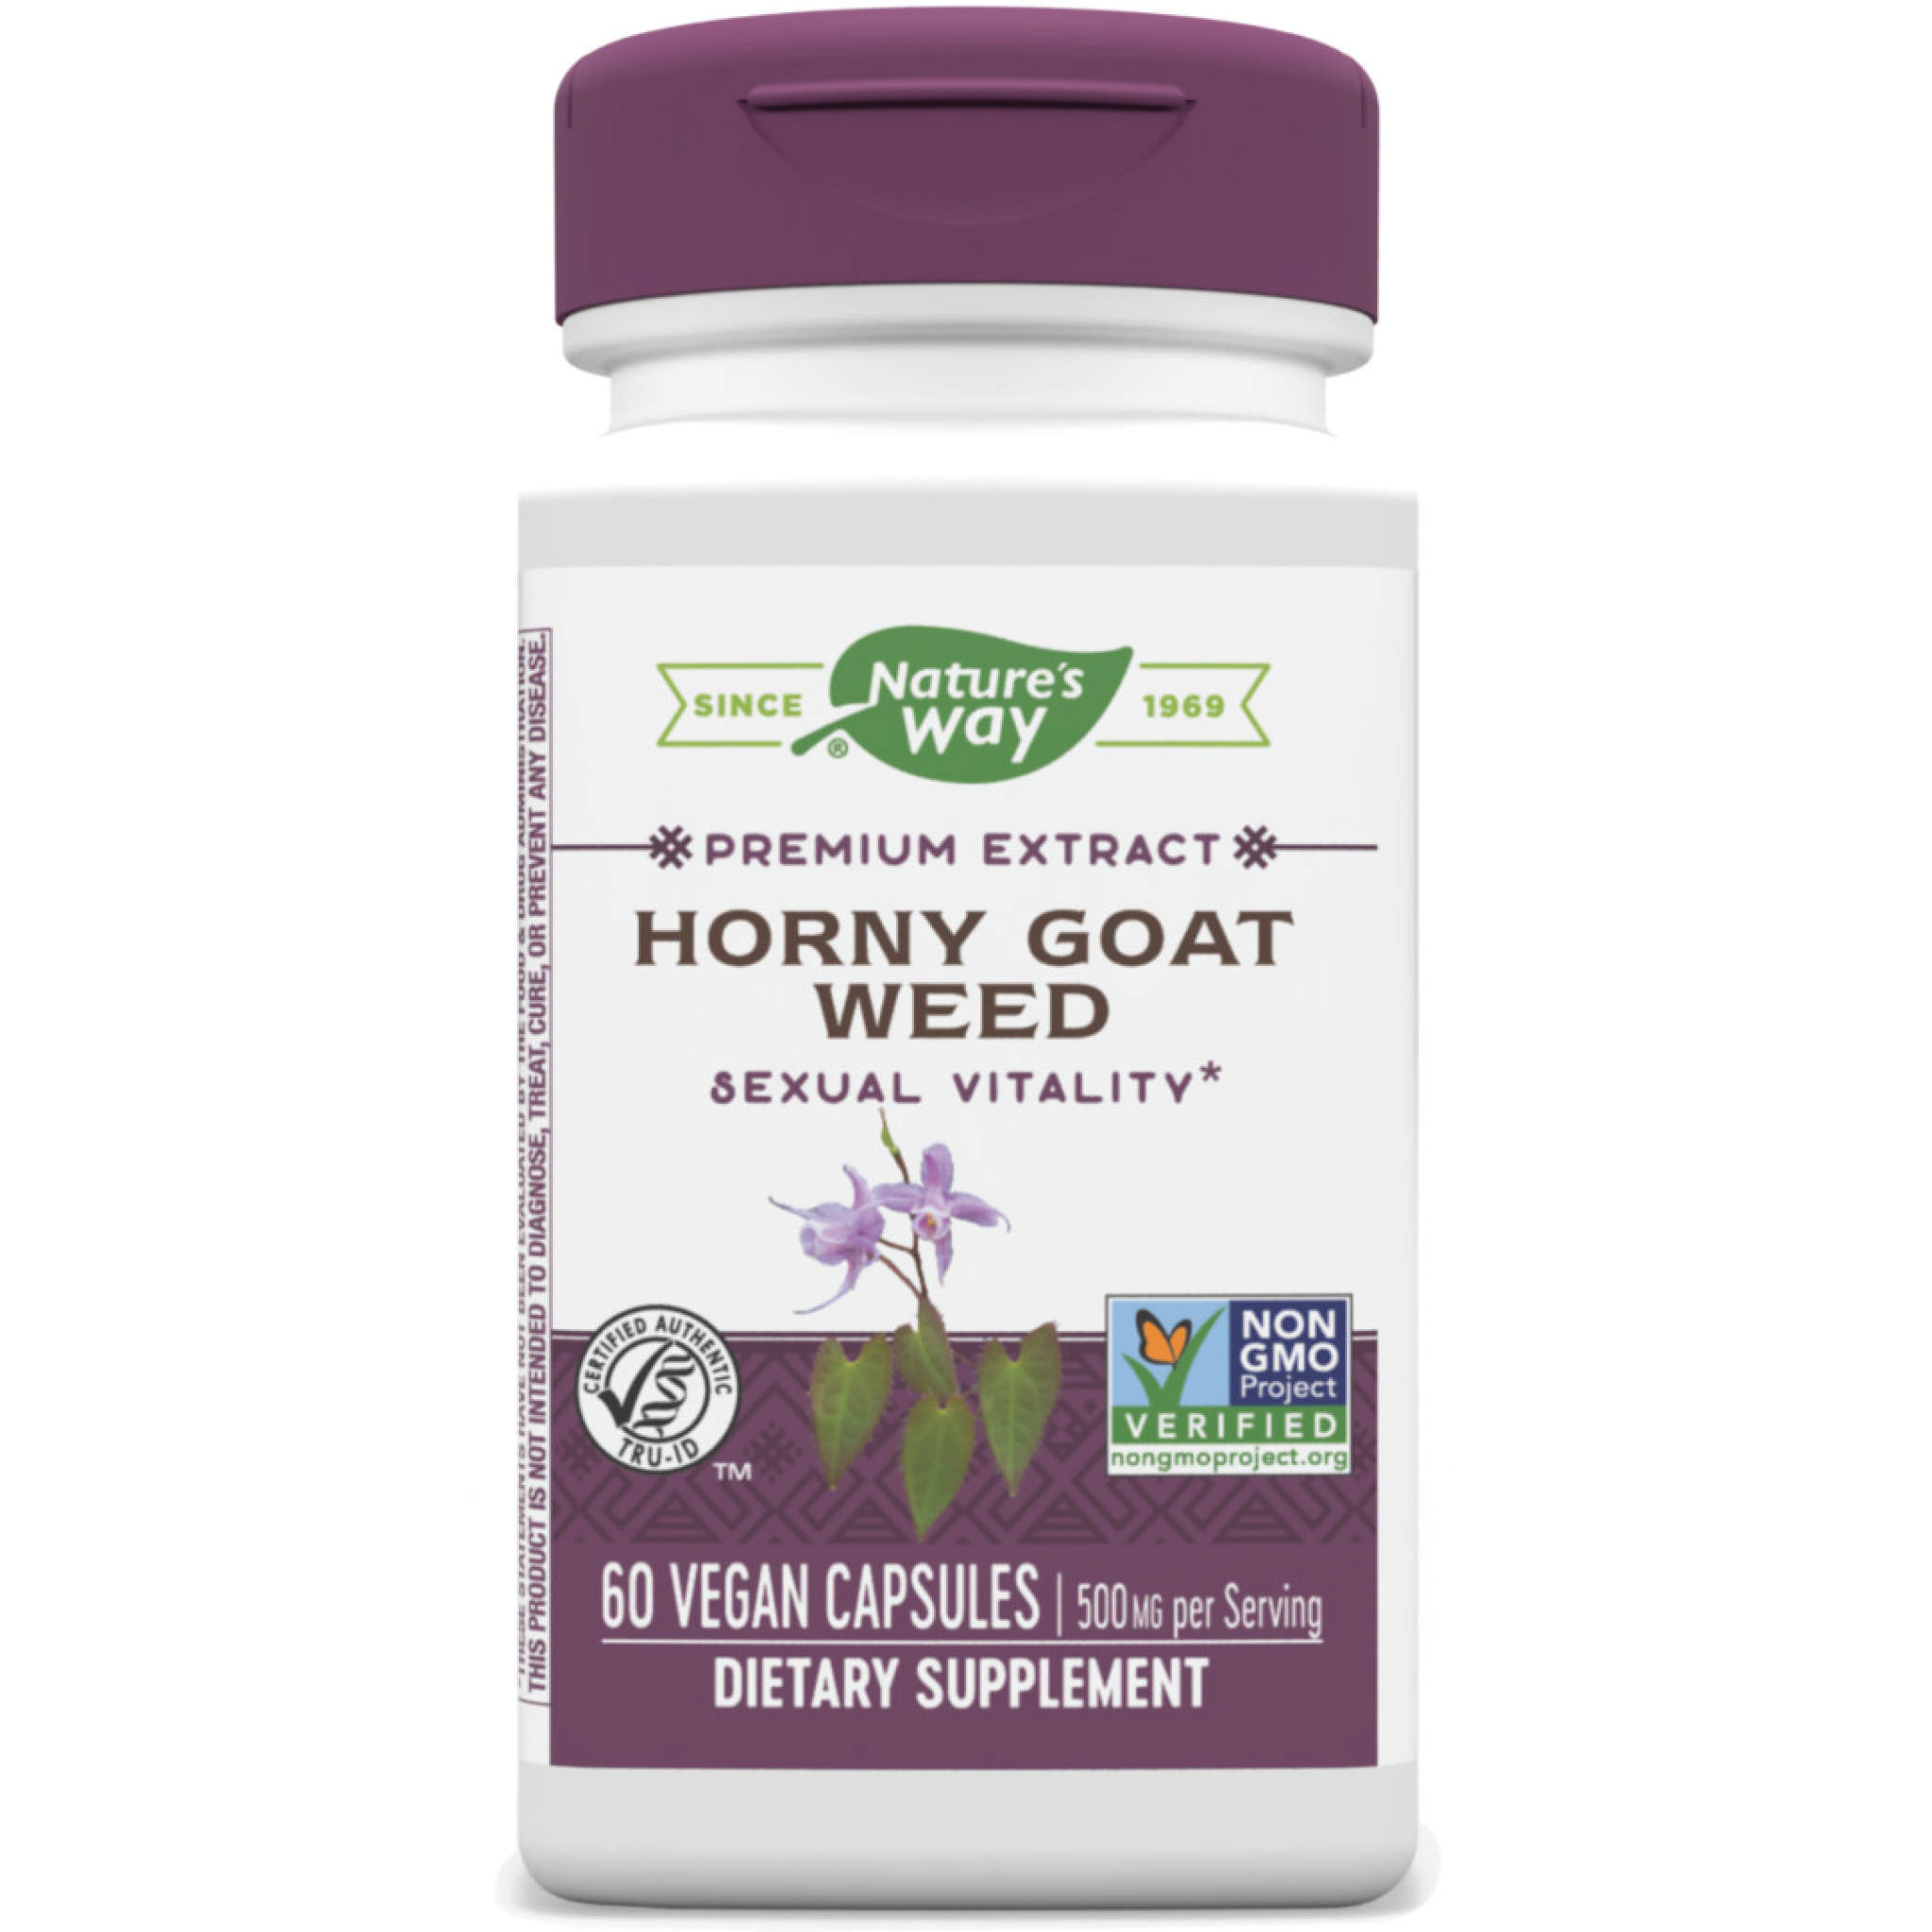 Natures Way - Horny Goat Weed